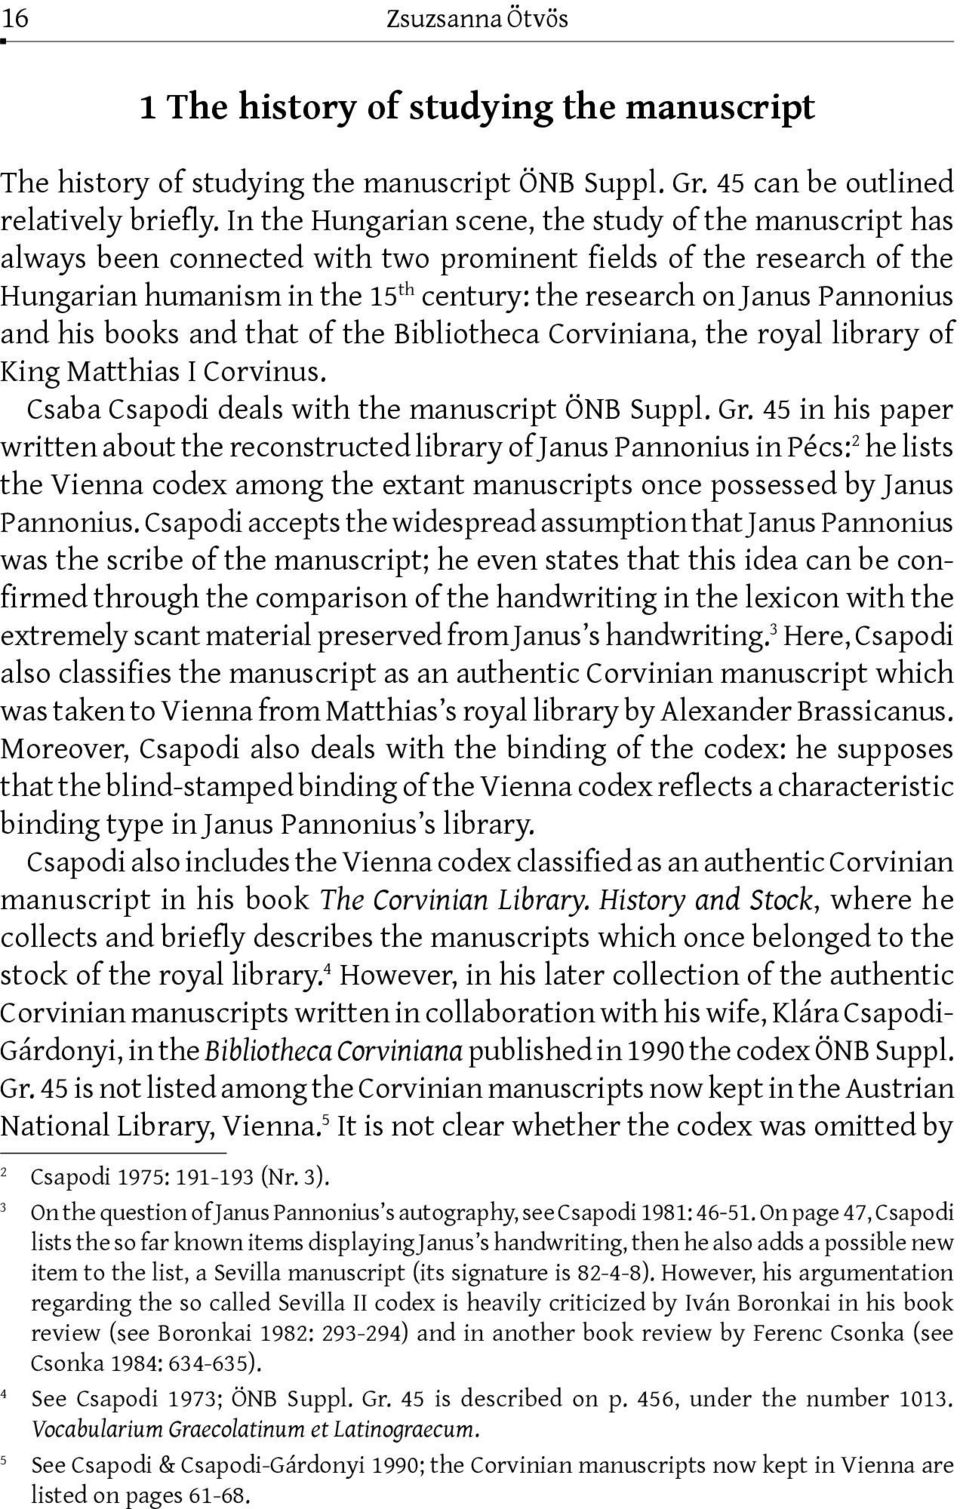 and his books and that of the Bibliotheca Corviniana, the royal library of King Matthias I Corvinus. Csaba Csapodi deals with the manuscript ÖNB Suppl. Gr.